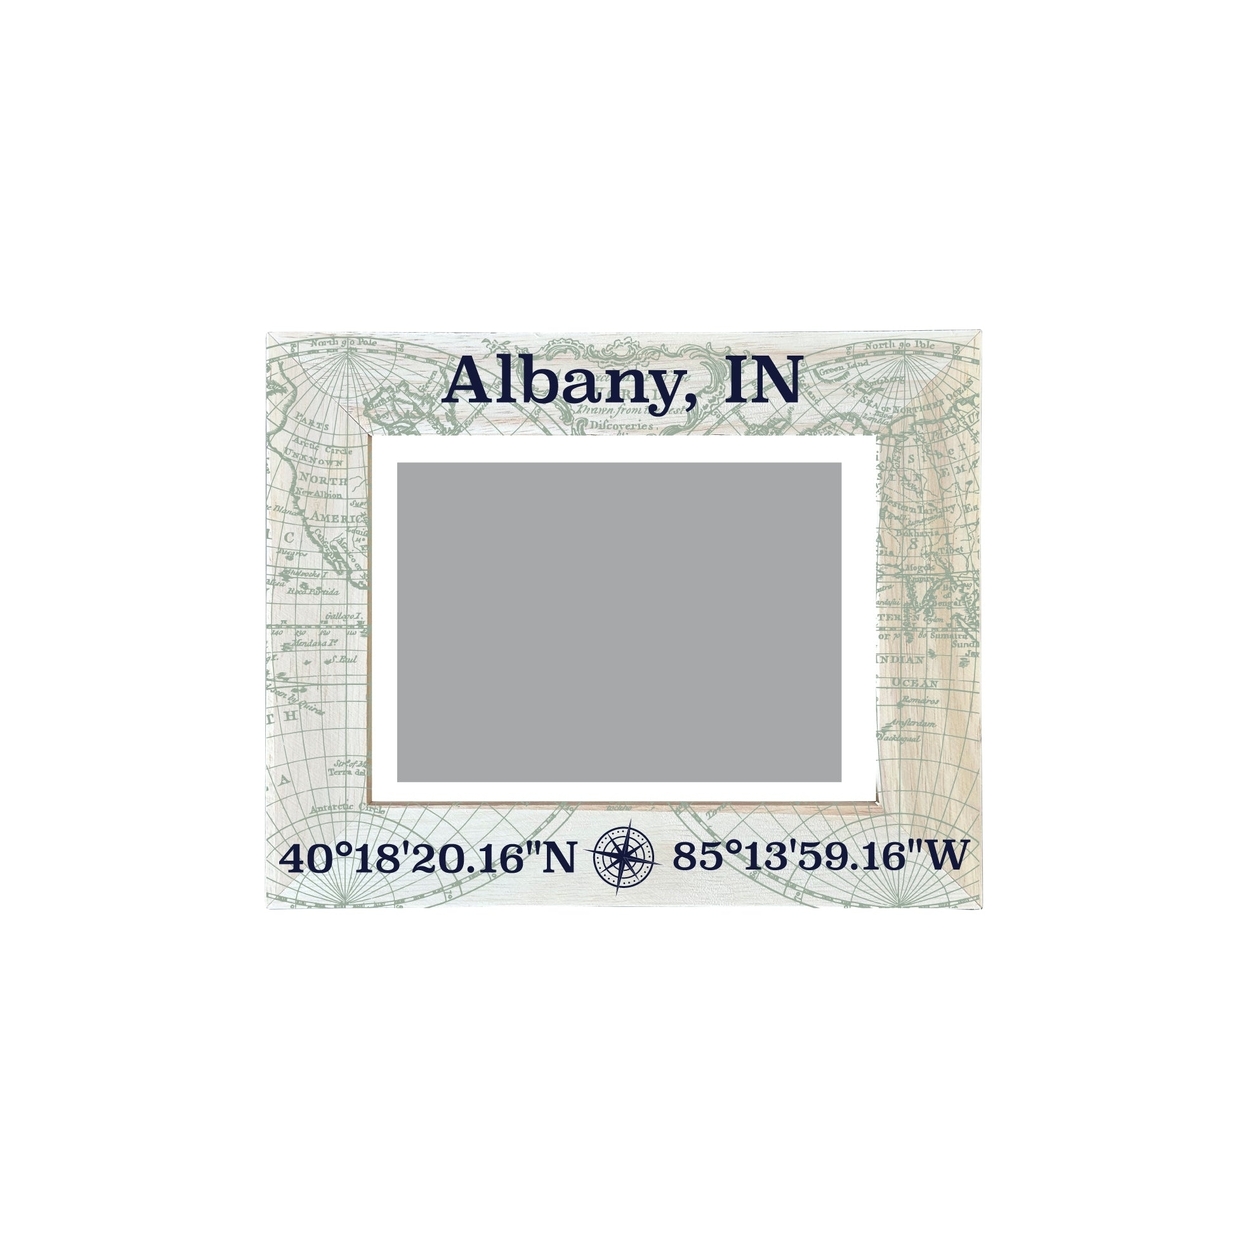 Albany Indiana Souvenir Wooden Photo Frame Compass Coordinates Design Matted To 4 X 6